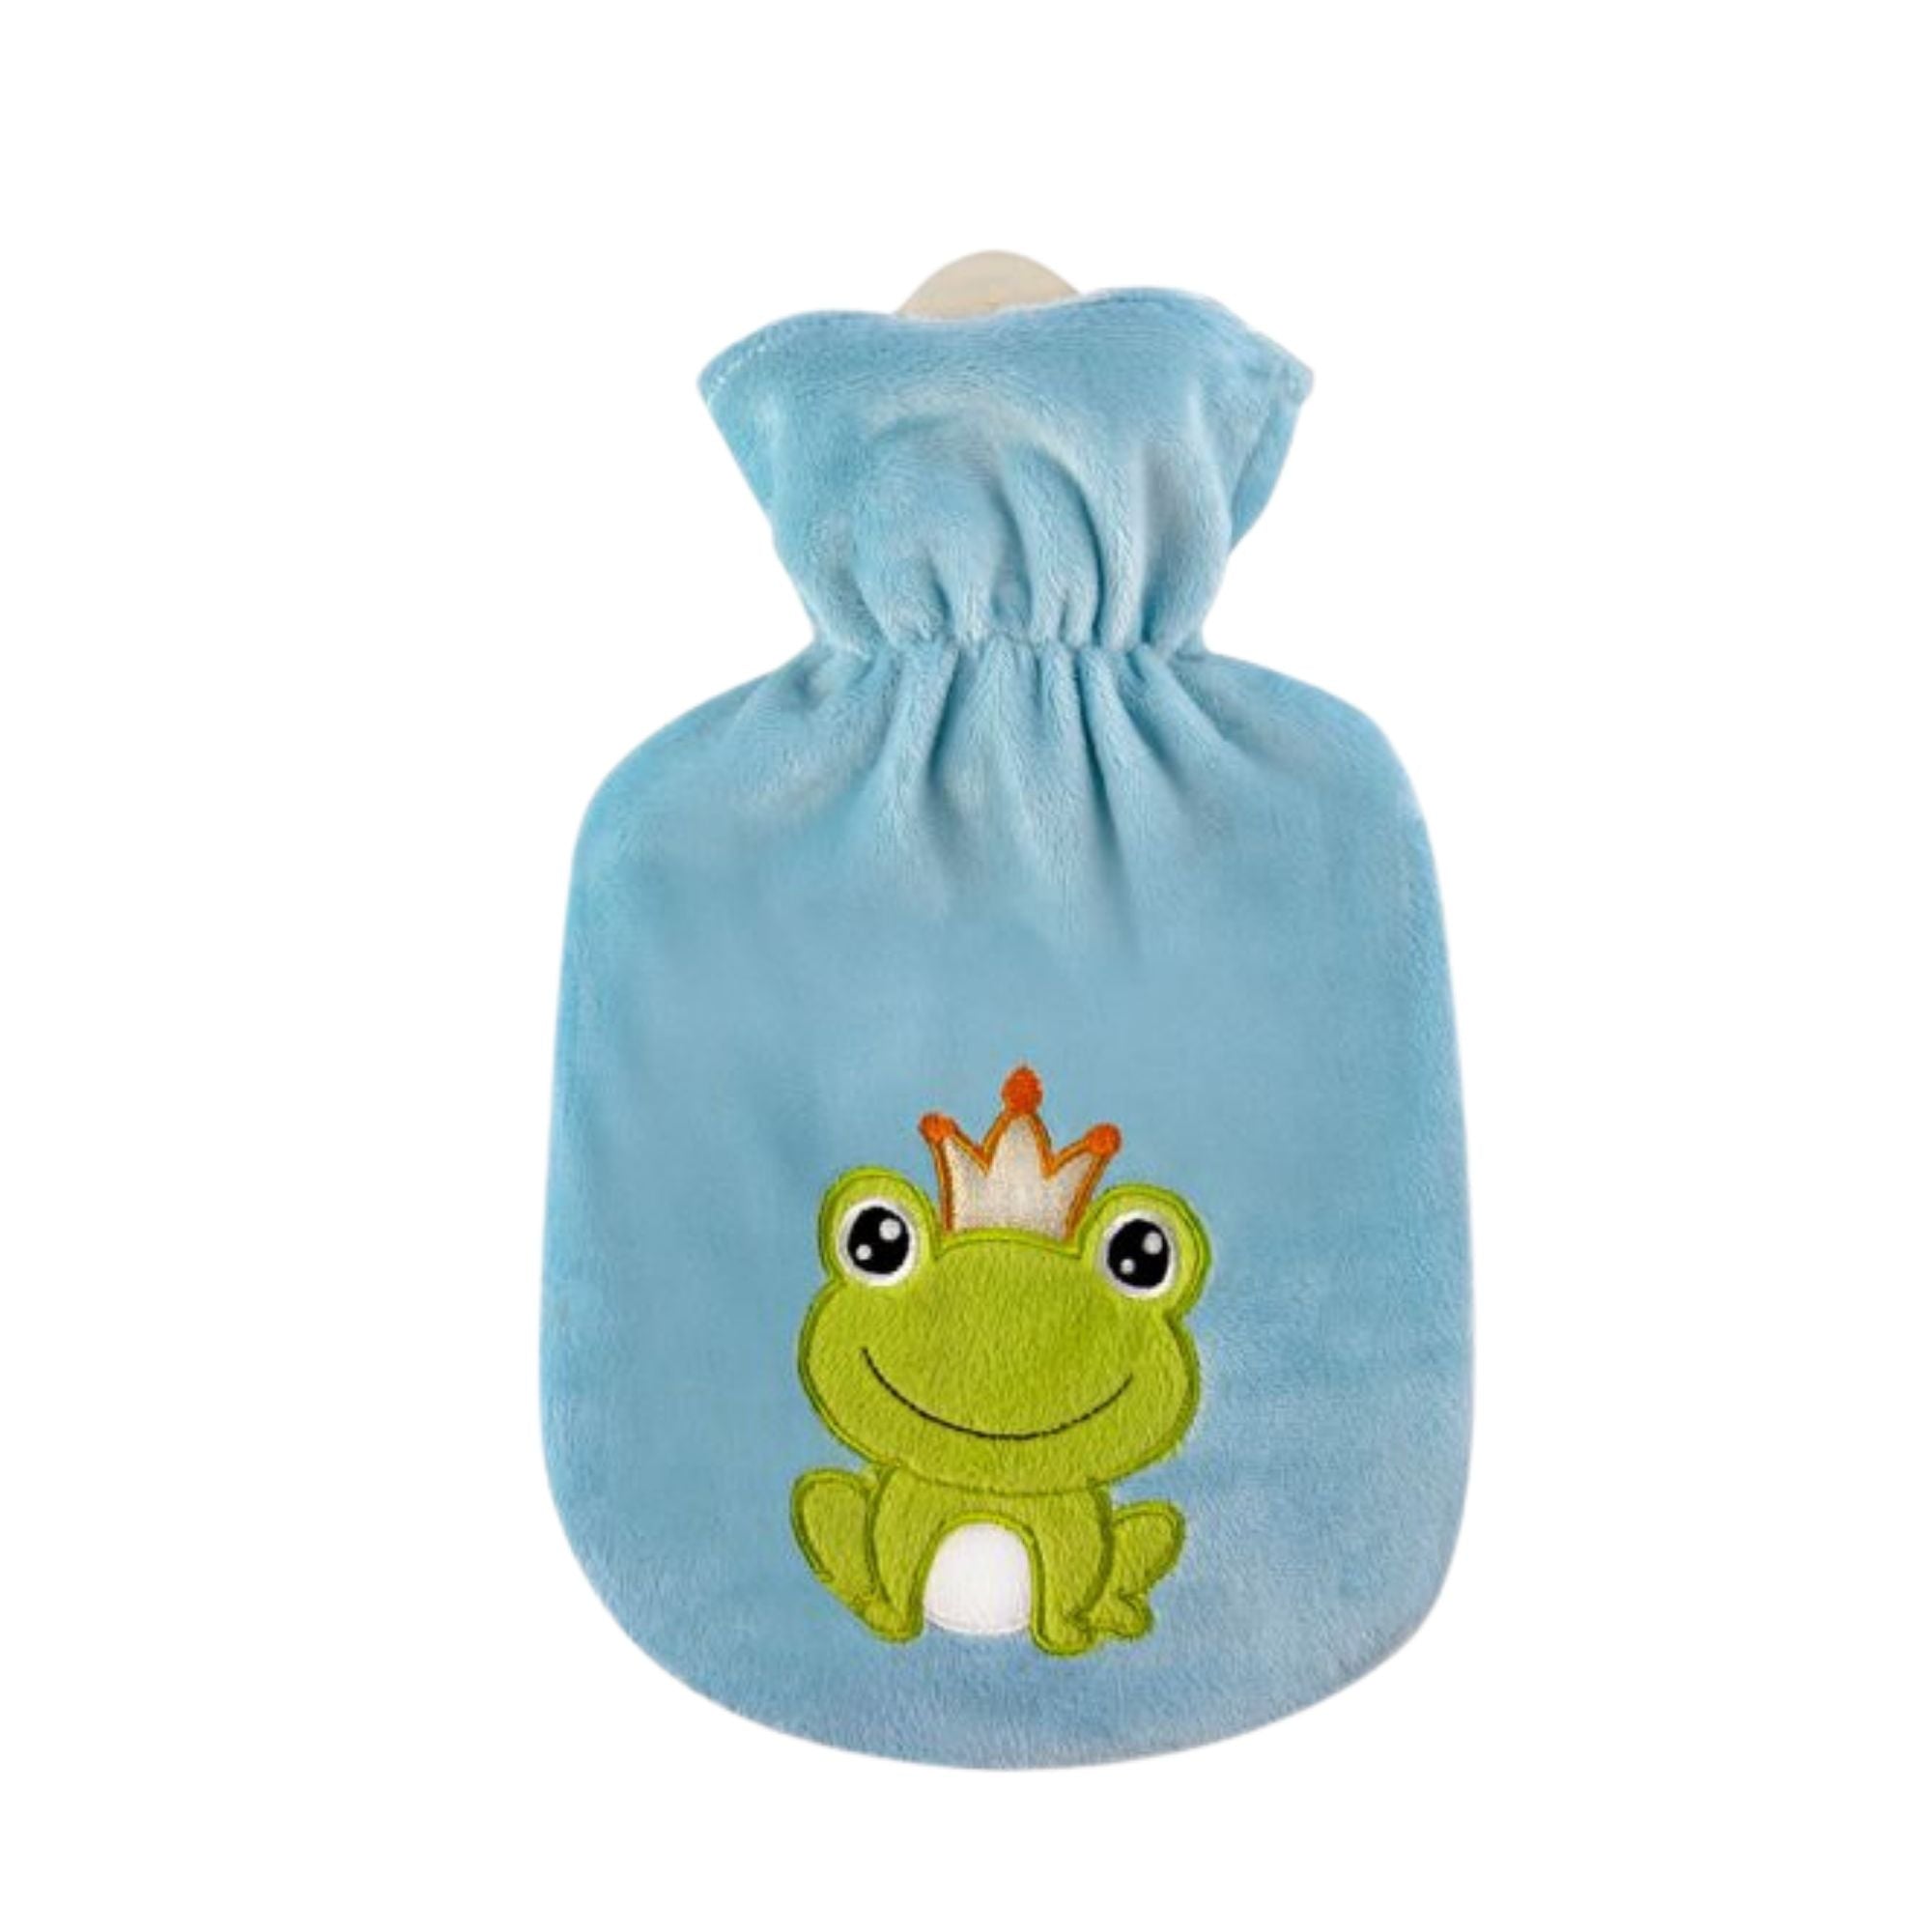 0.8 Litre Sanger Hot Water Bottle with Frog Cover